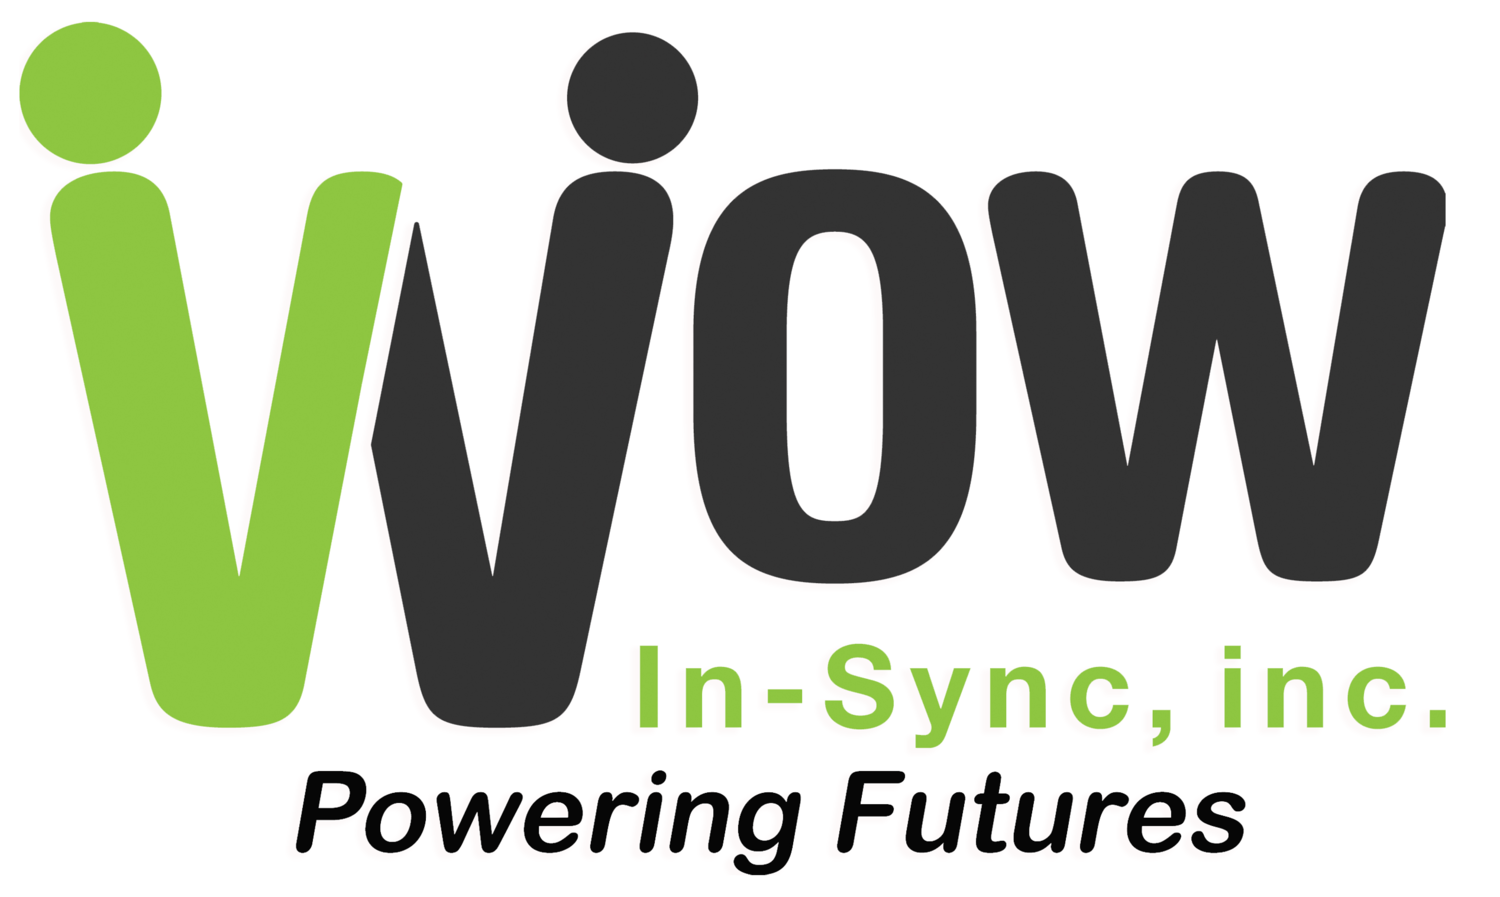 Wow In-Sync, Inc.